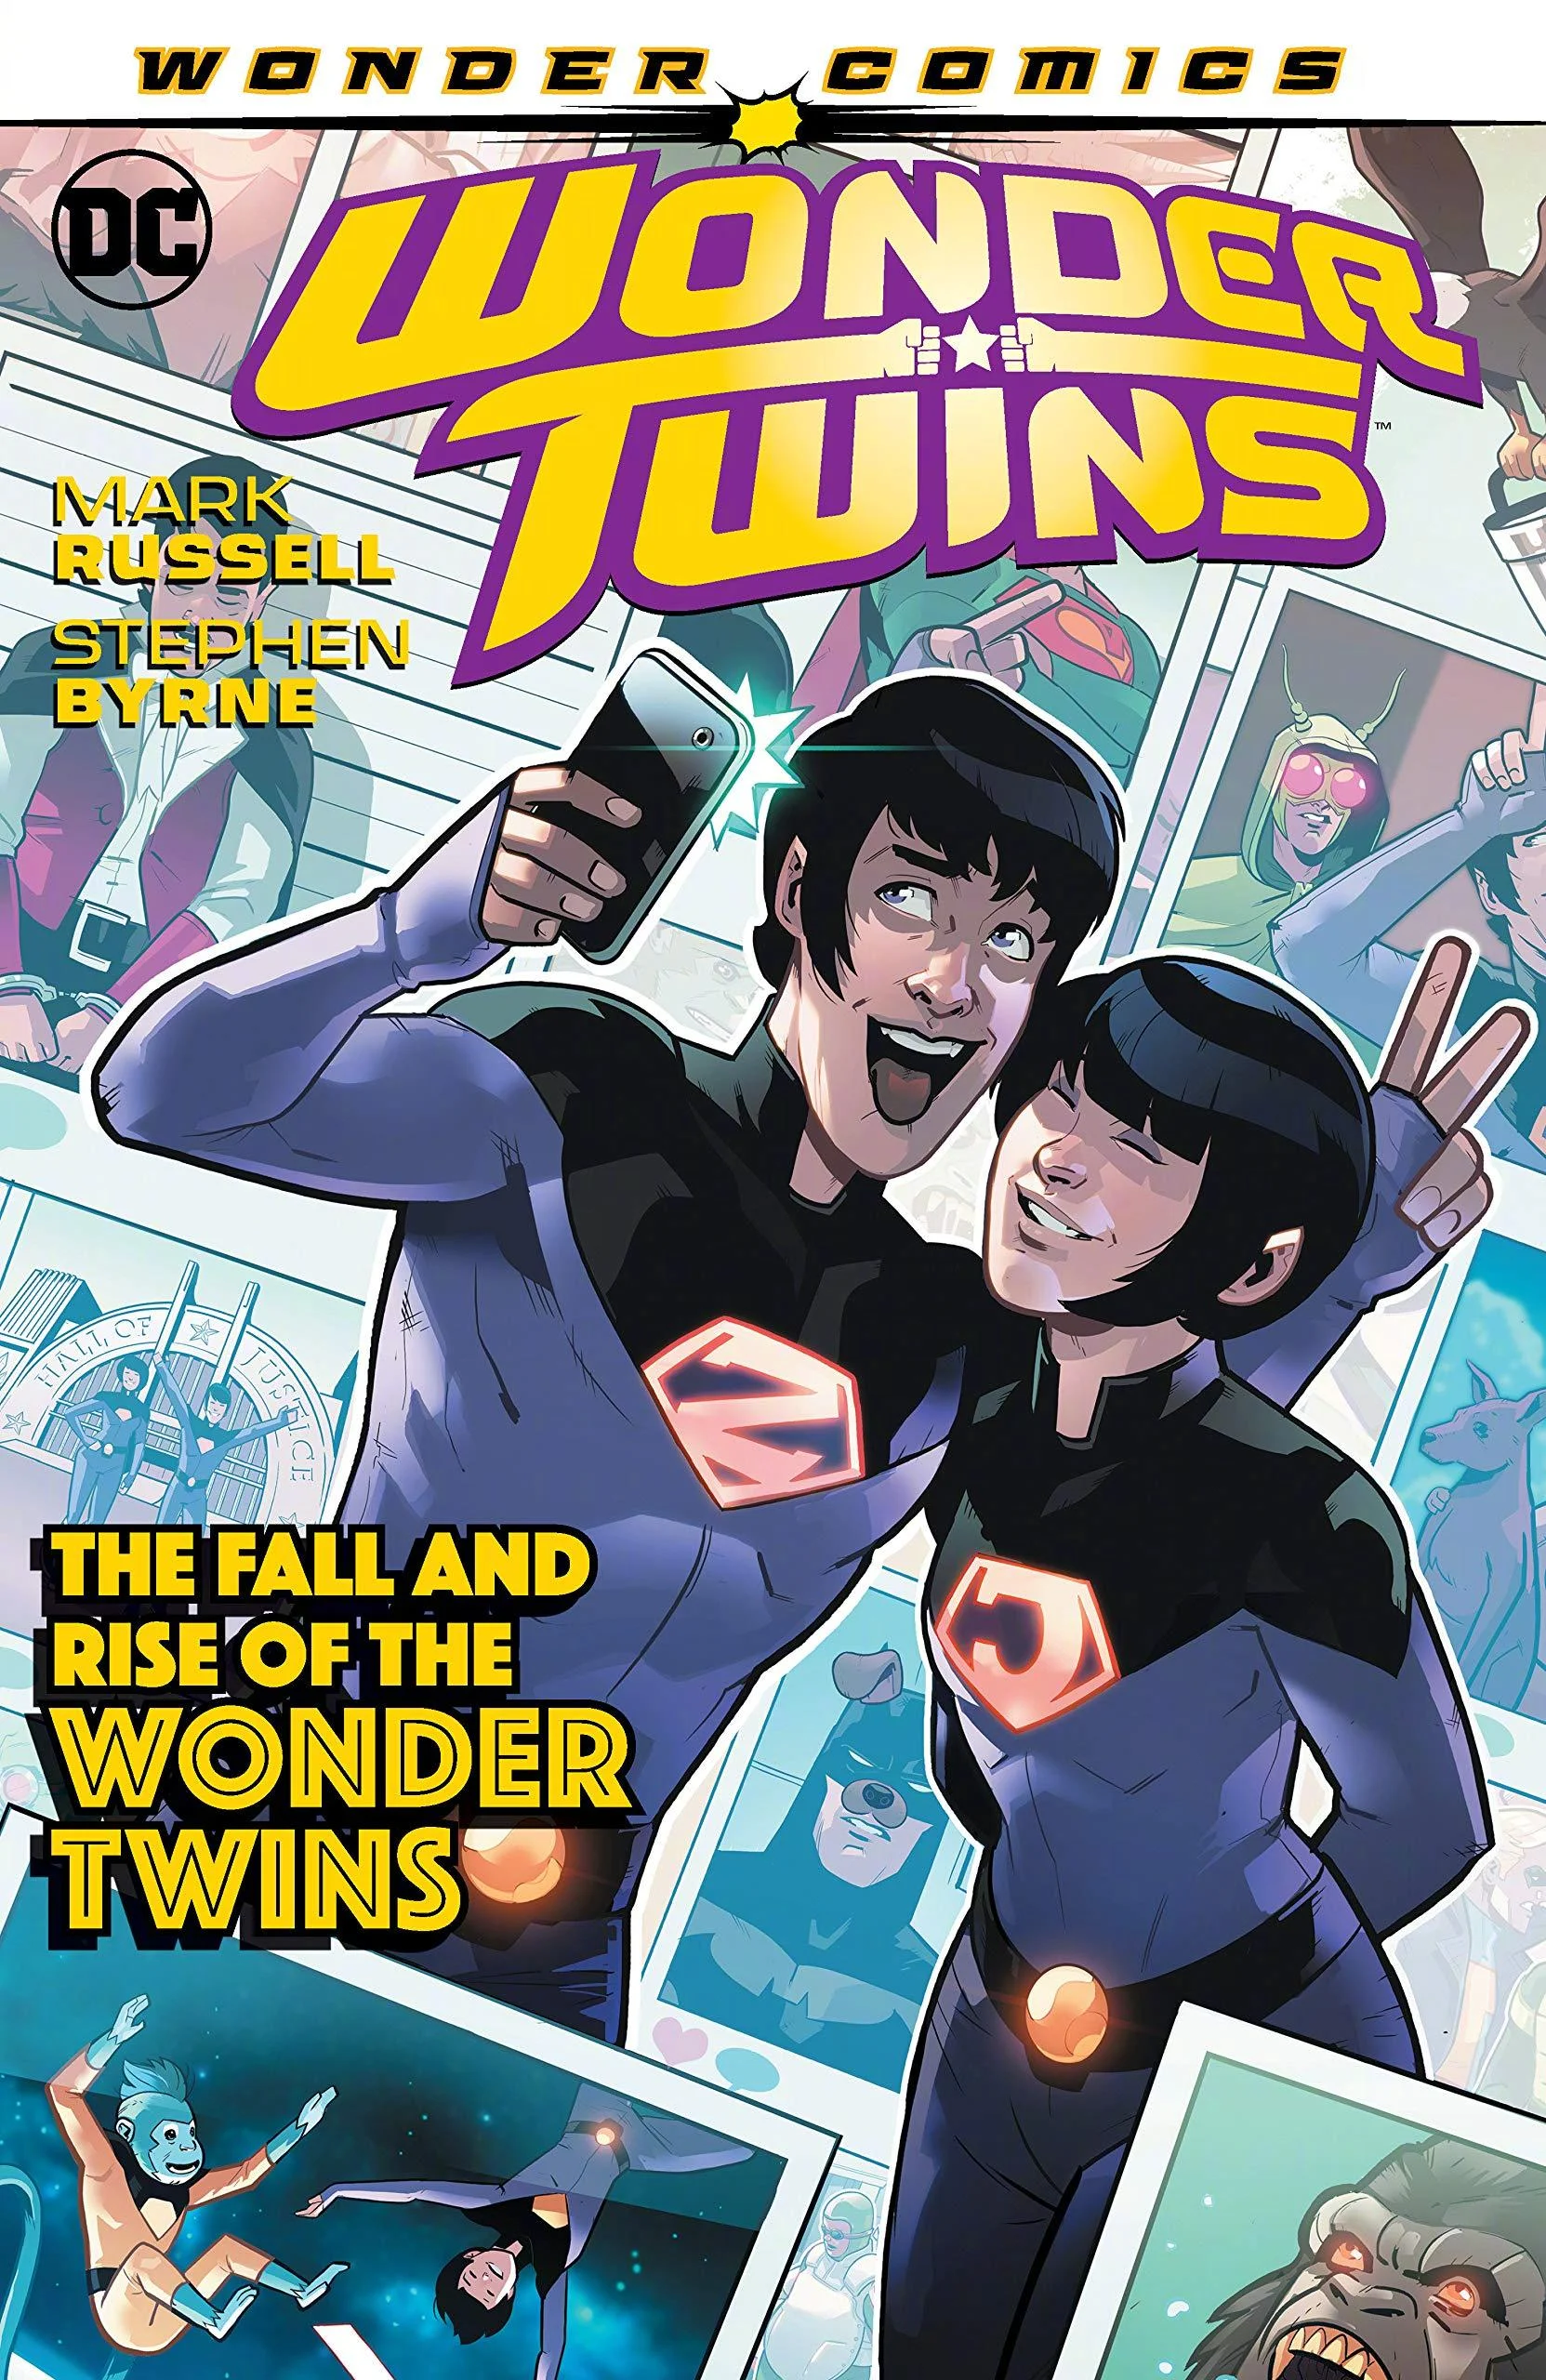 K.J. Apa and Isabel May will star in new DC superhero film "Wonder Twins‎"